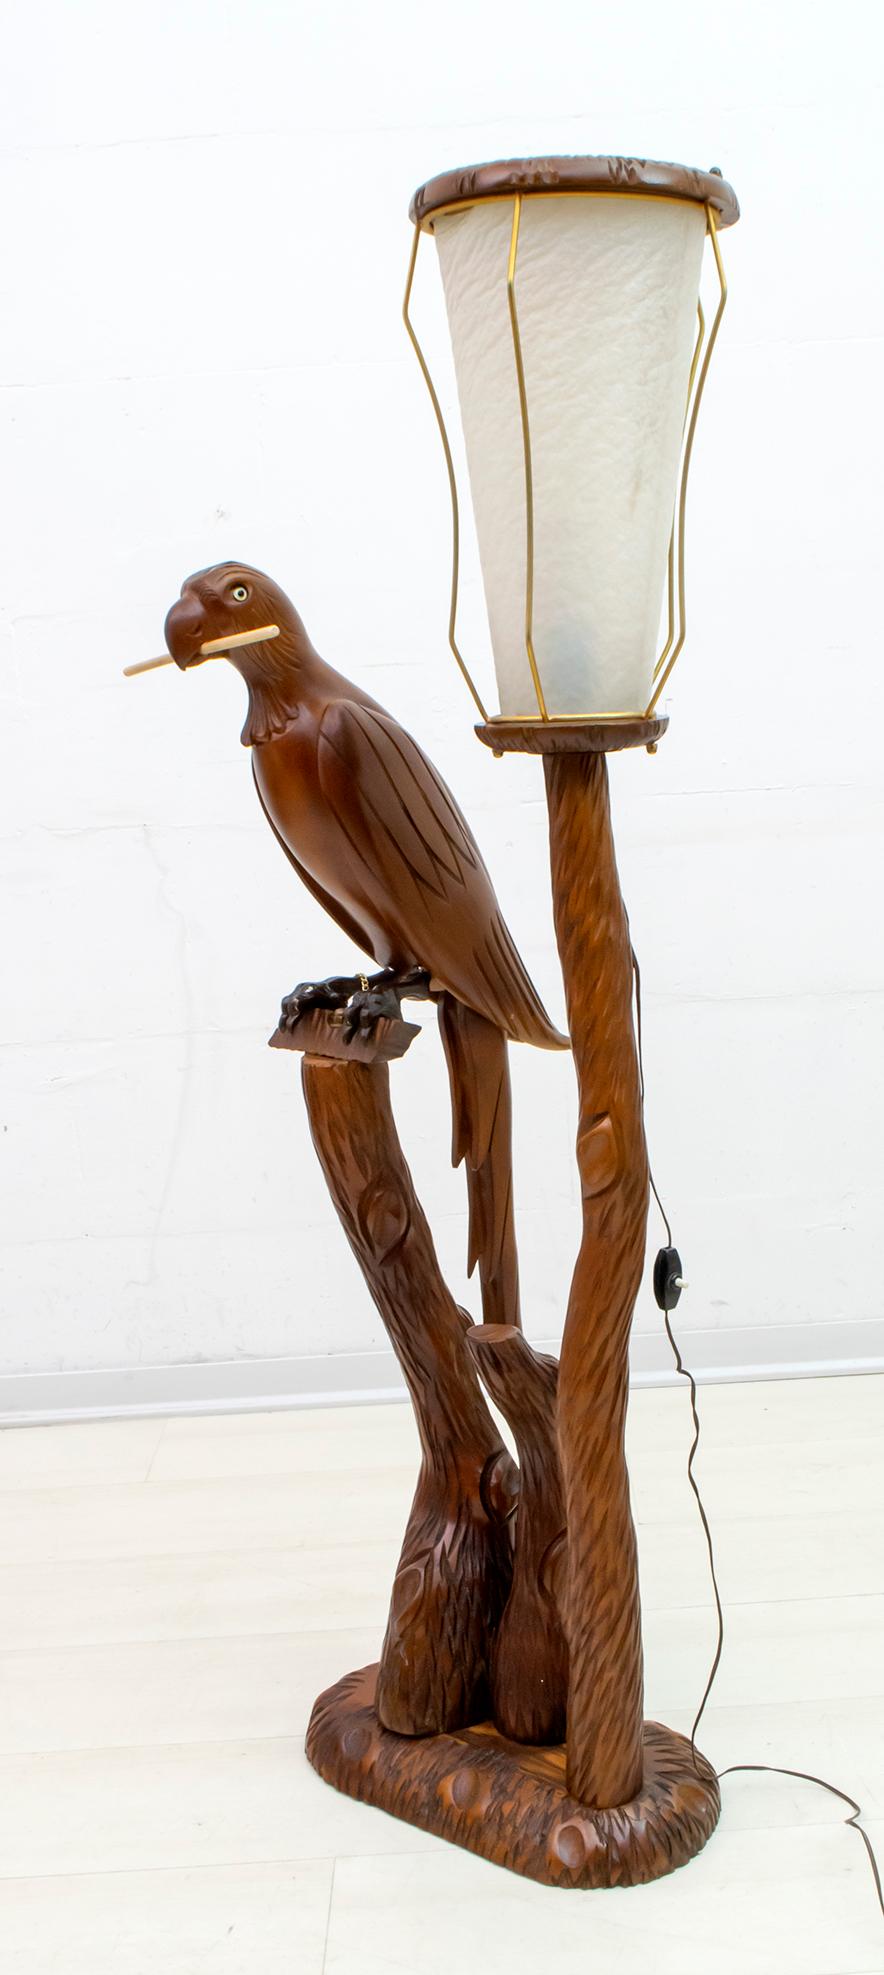 This carved wooden floor lamp was designed by Aldo Tura; it can be dated in the 1950s. The wooden sculpture represents a parrot, the lantern with brass and goatskin supports. This lamp is in excellent original condition.